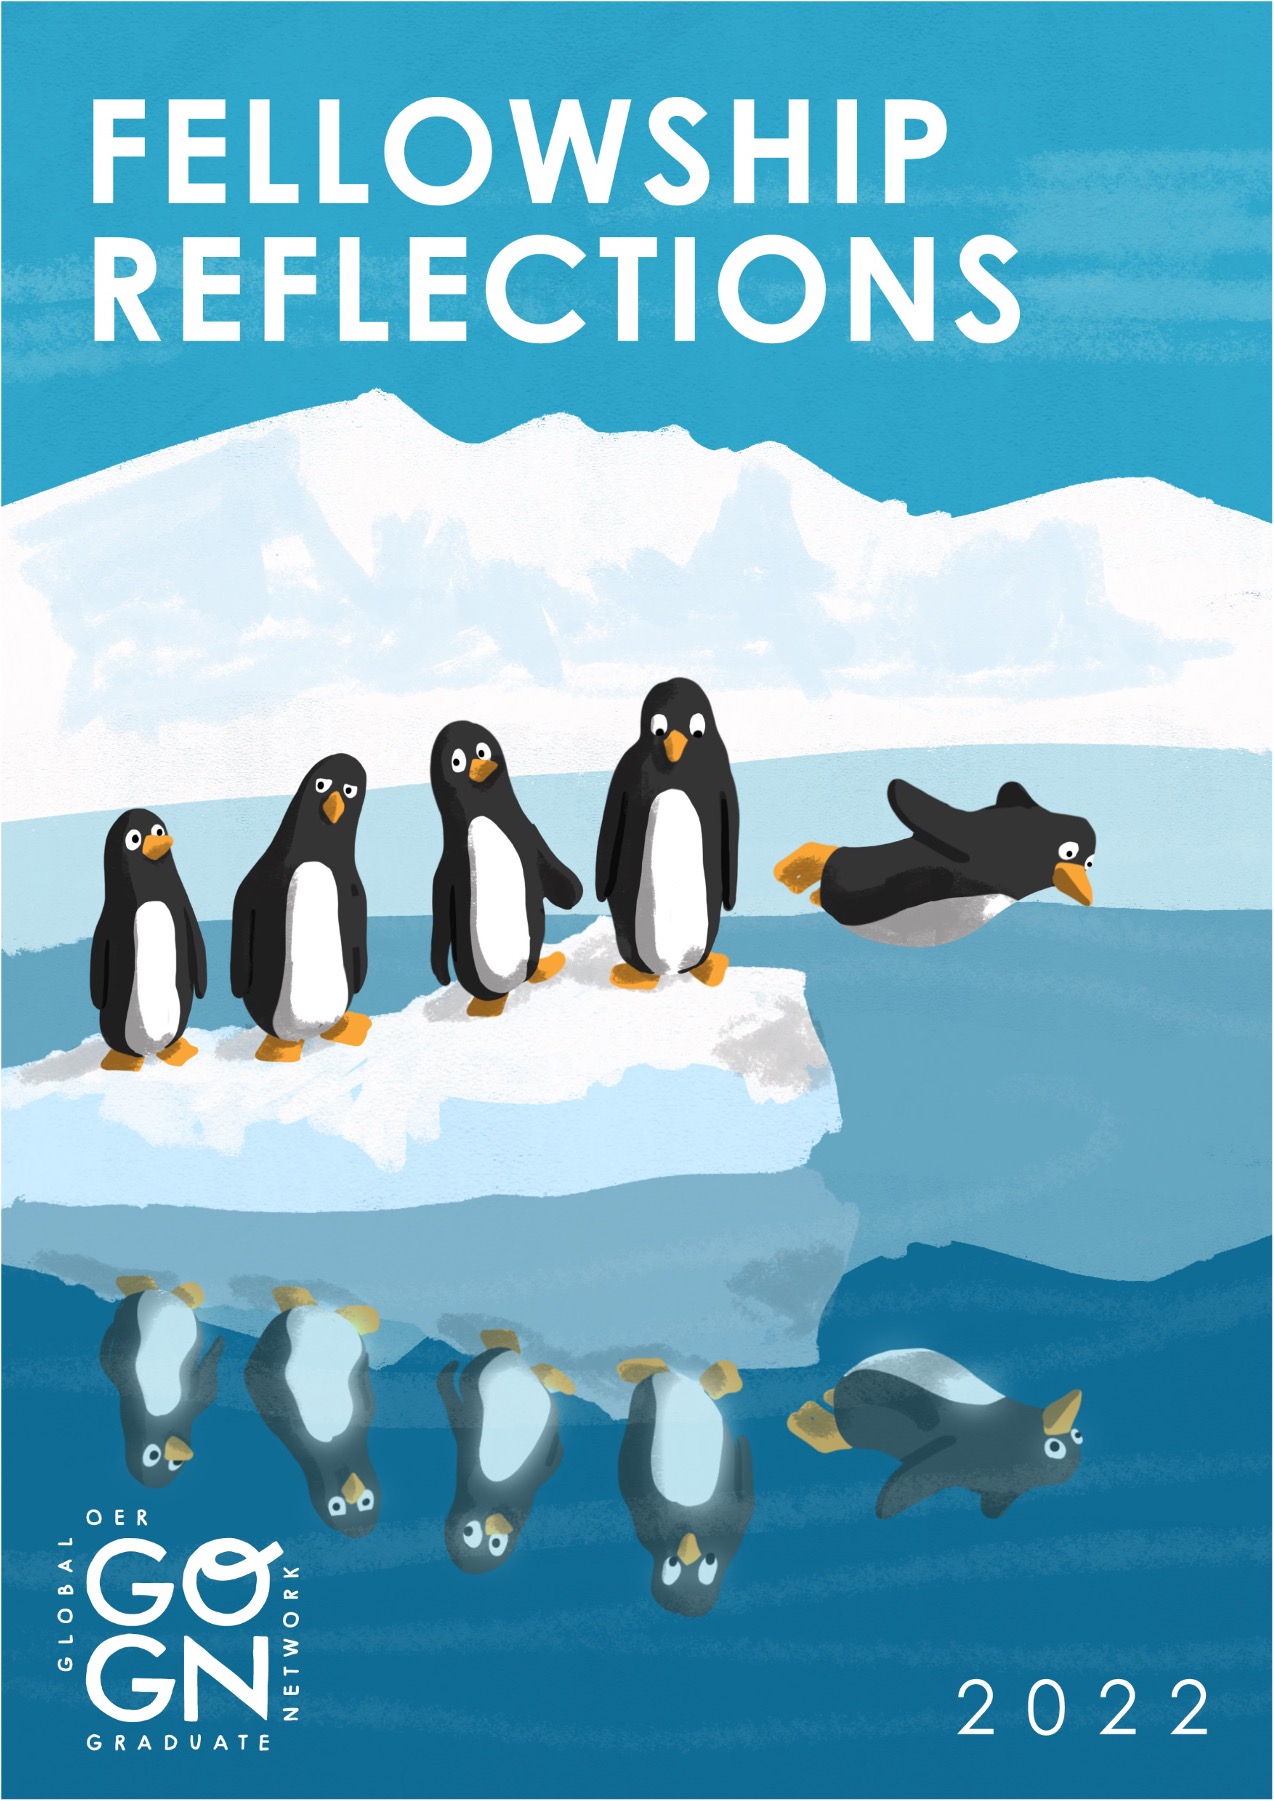 Cover of GO-GN Fellowship Reflections Report, showing 4 penguins on an iceberg, with one penguin diving into the water - looking at their reflection